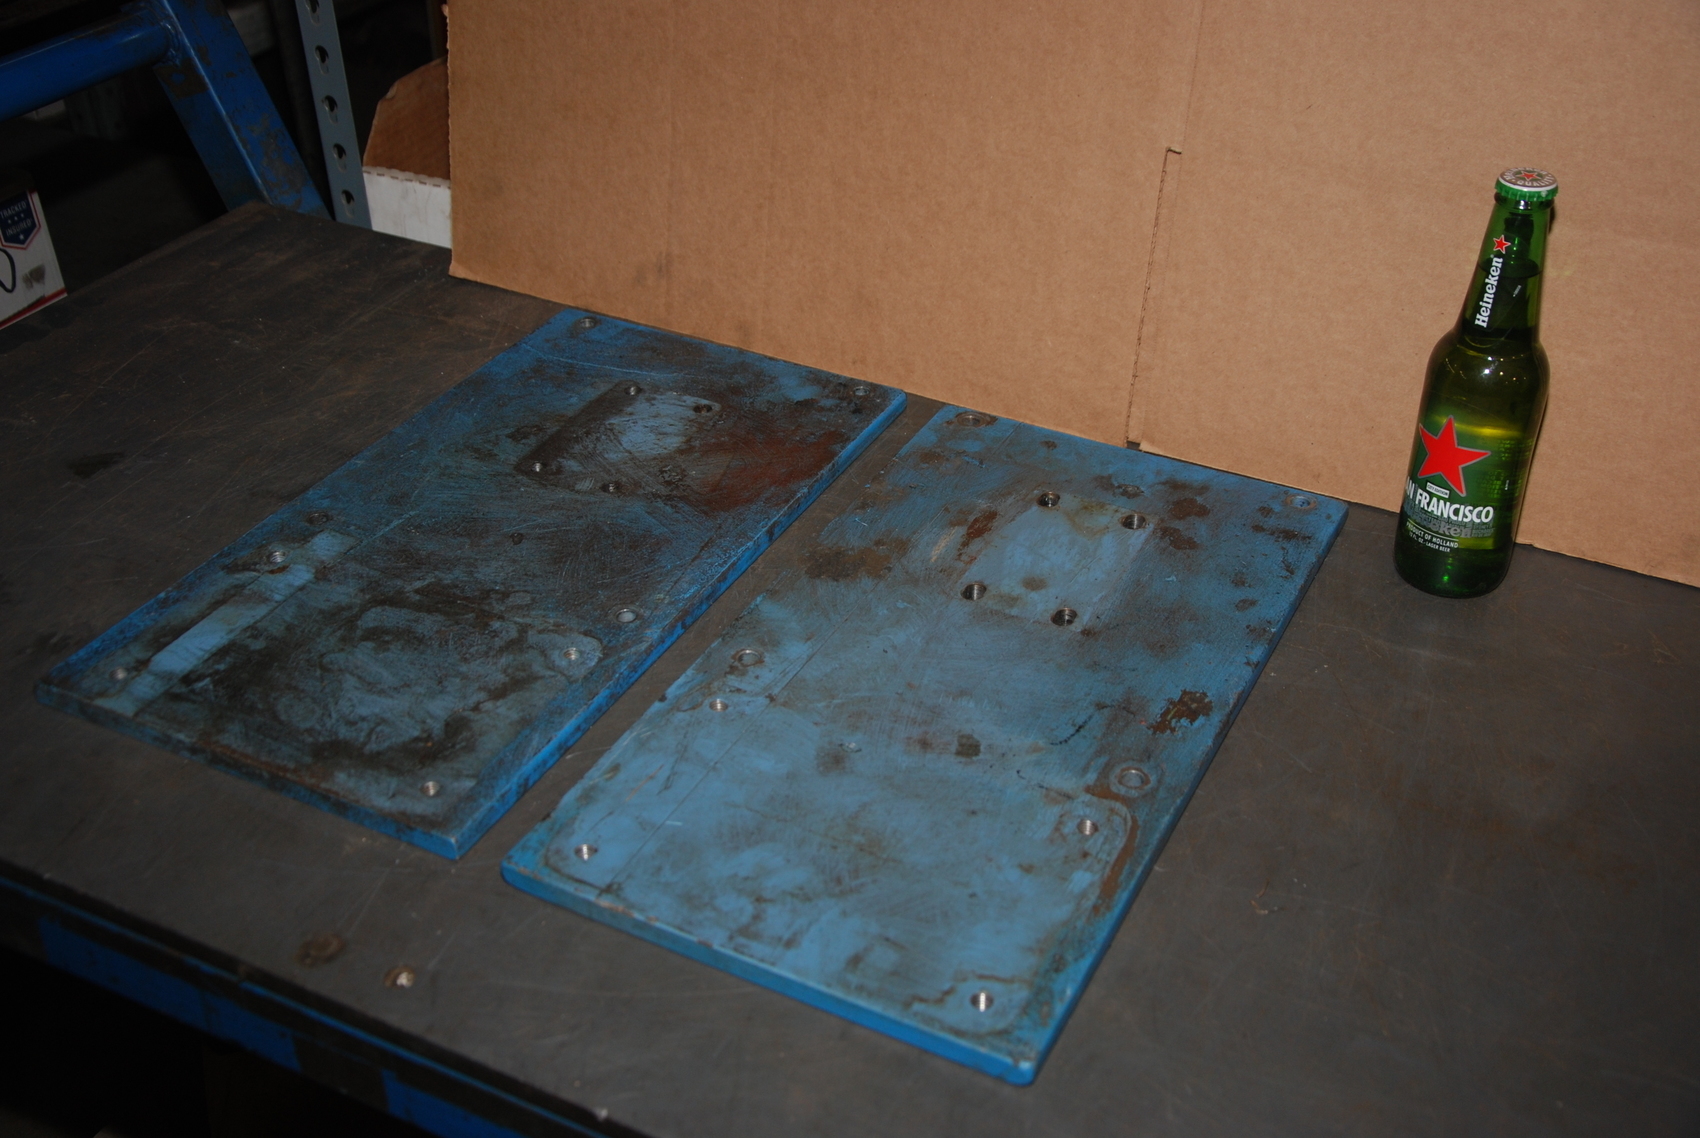 Lot of 2 steel Plate for blacksmith anvil,50 lbs